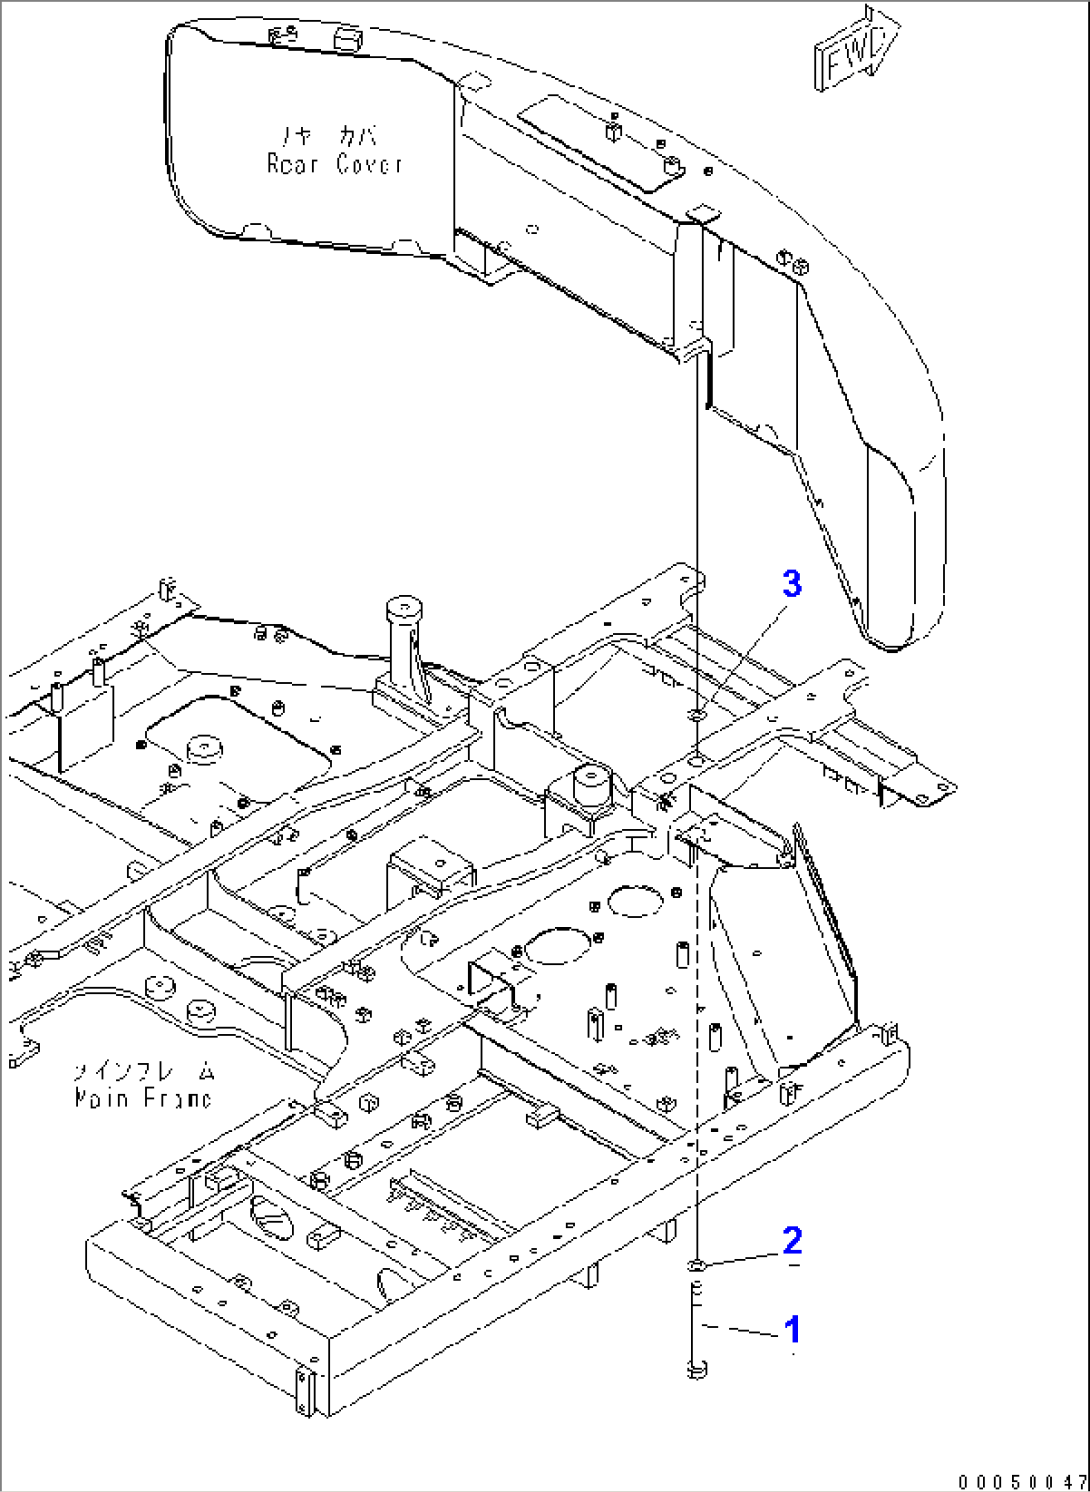 REAR COVER MOUNTING PARTS